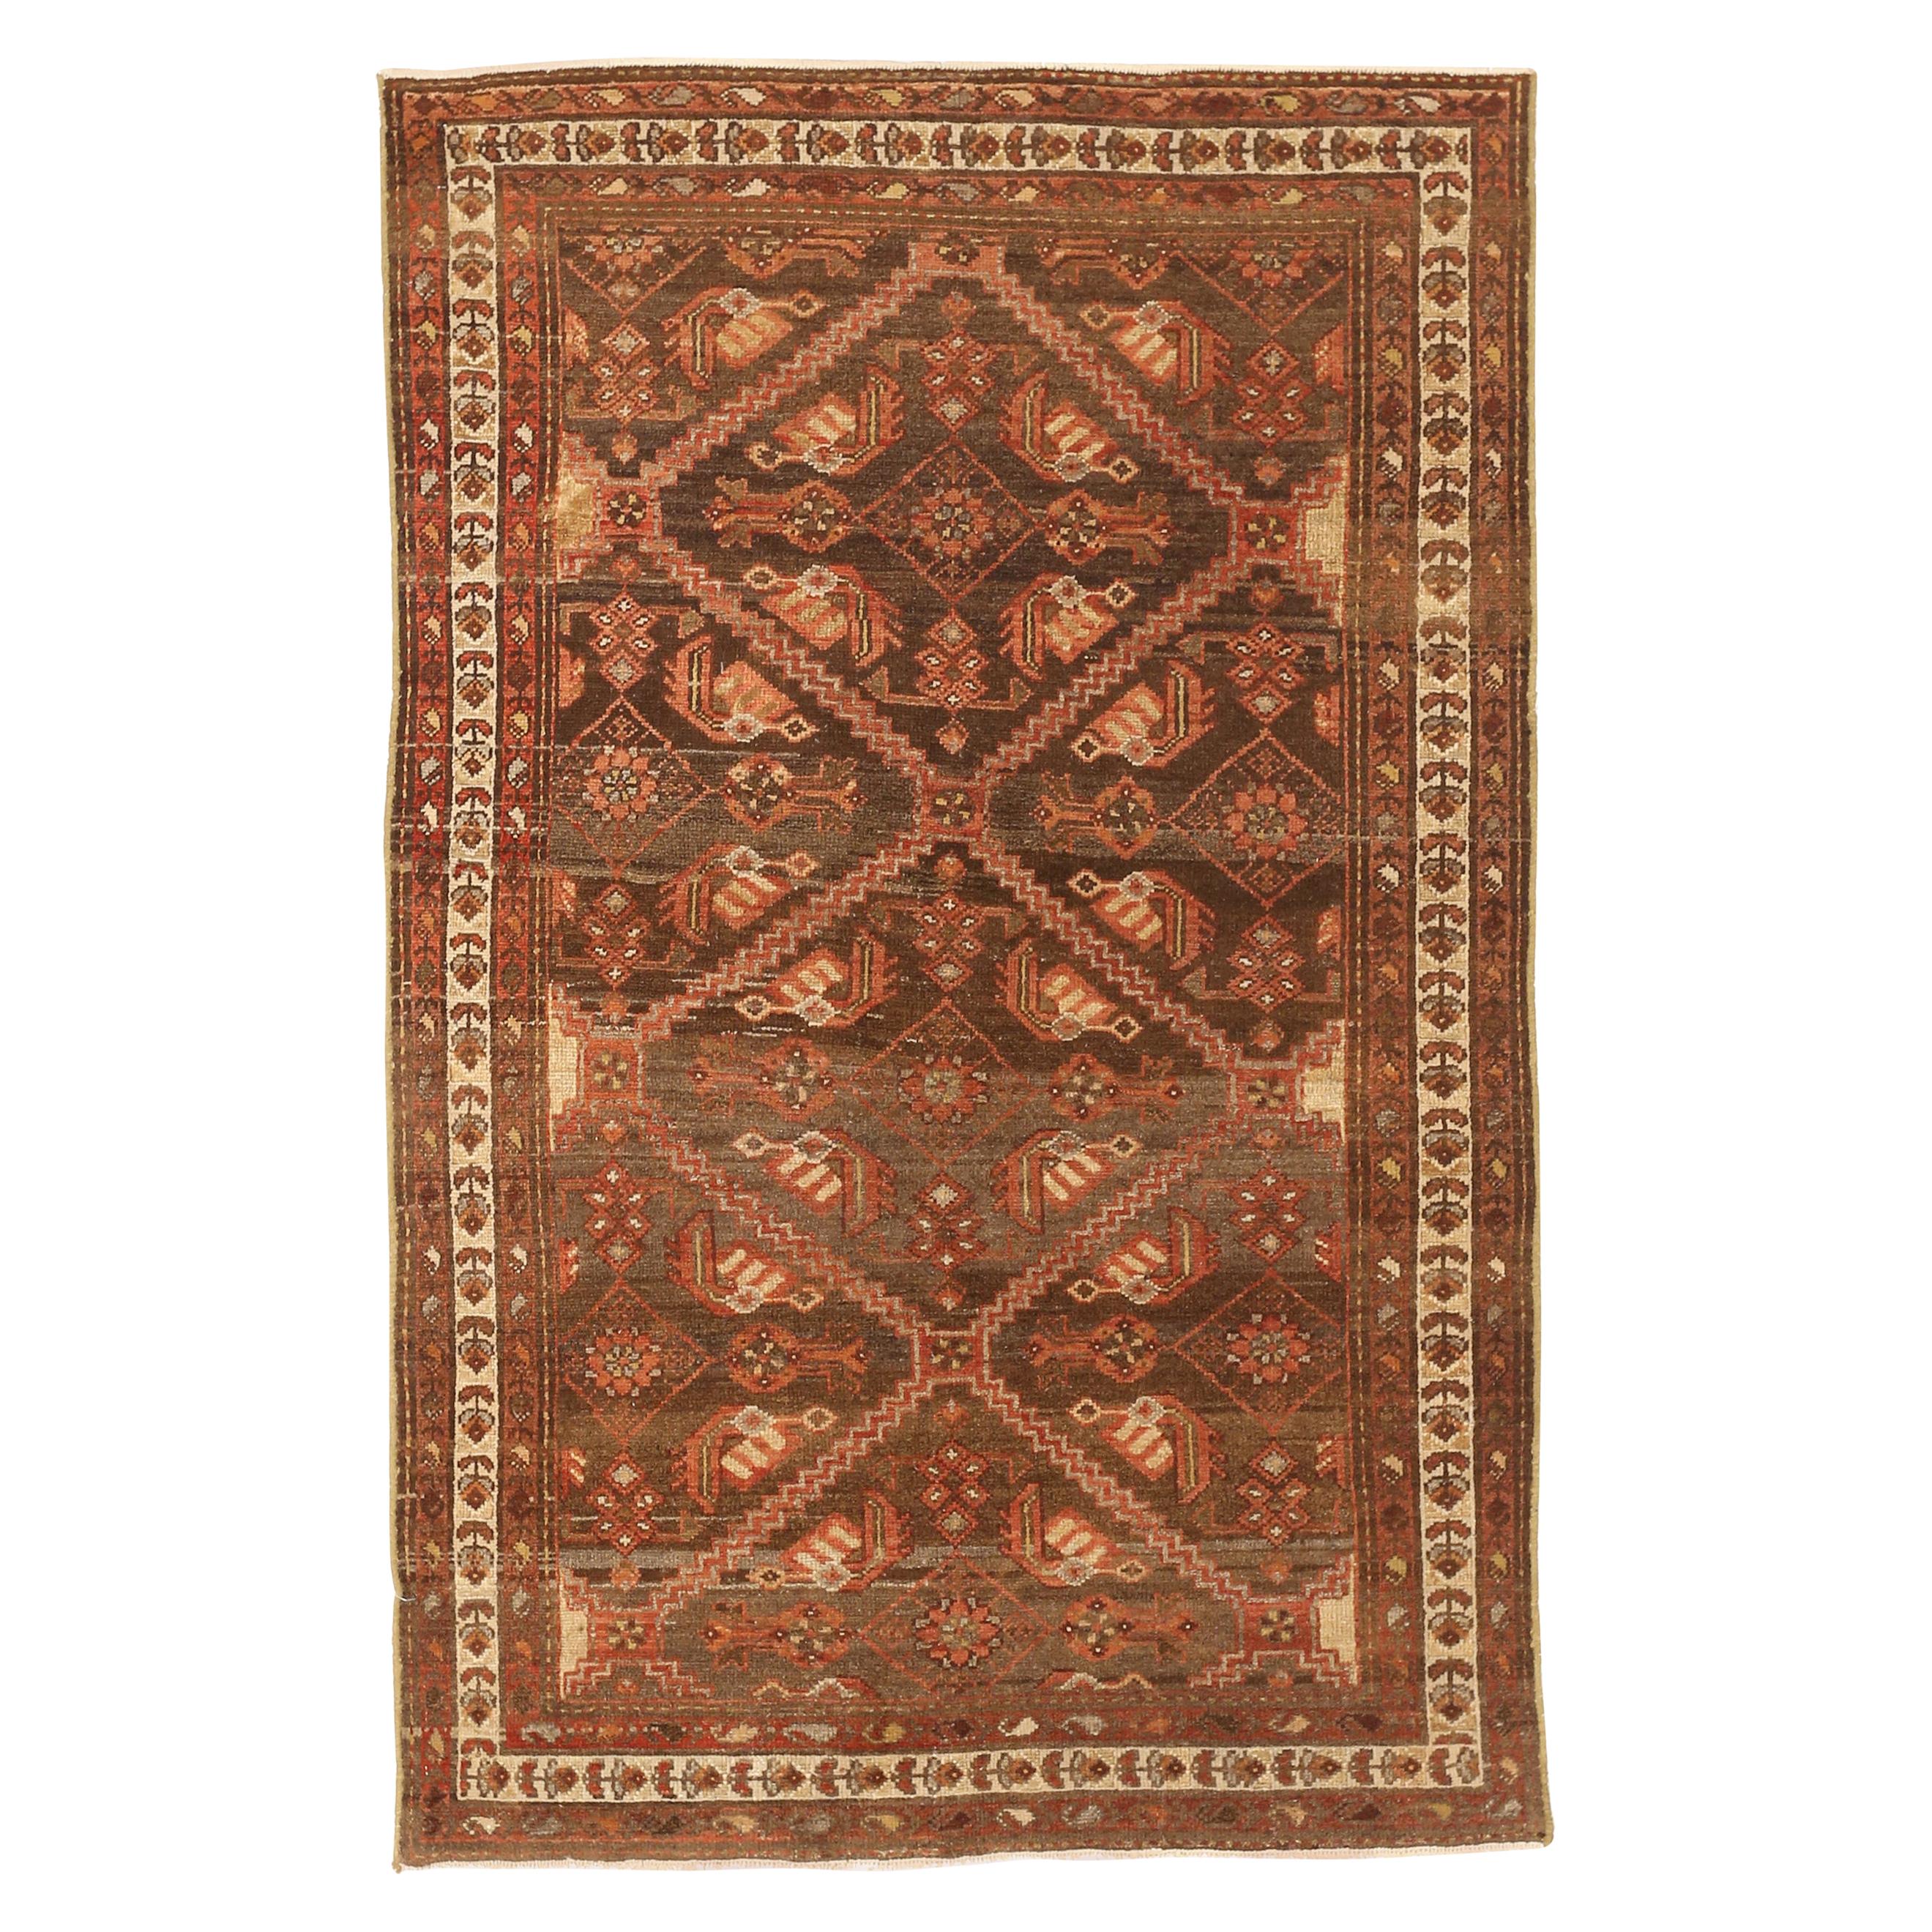 Antique Persian Amereh Rug with Red and Gray Tribal Details on Brown Field